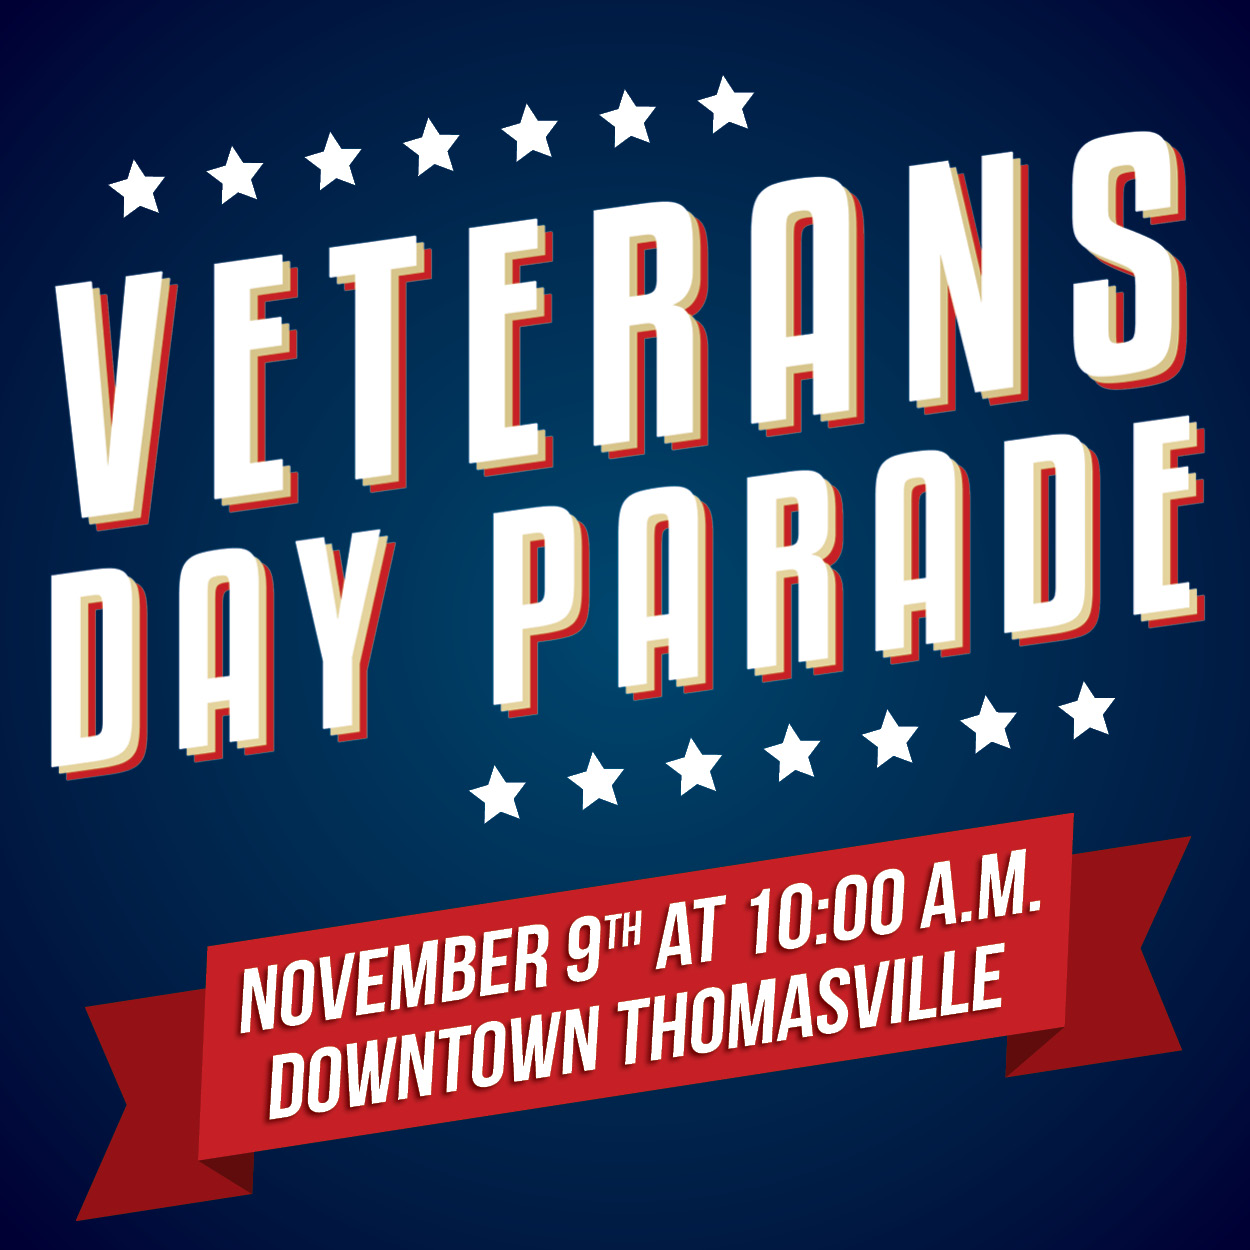 Photo for VETERANS DAY PARADE TO BE HELD ON NOVEMBER 9TH IN DOWNTOWN THOMASVILLE